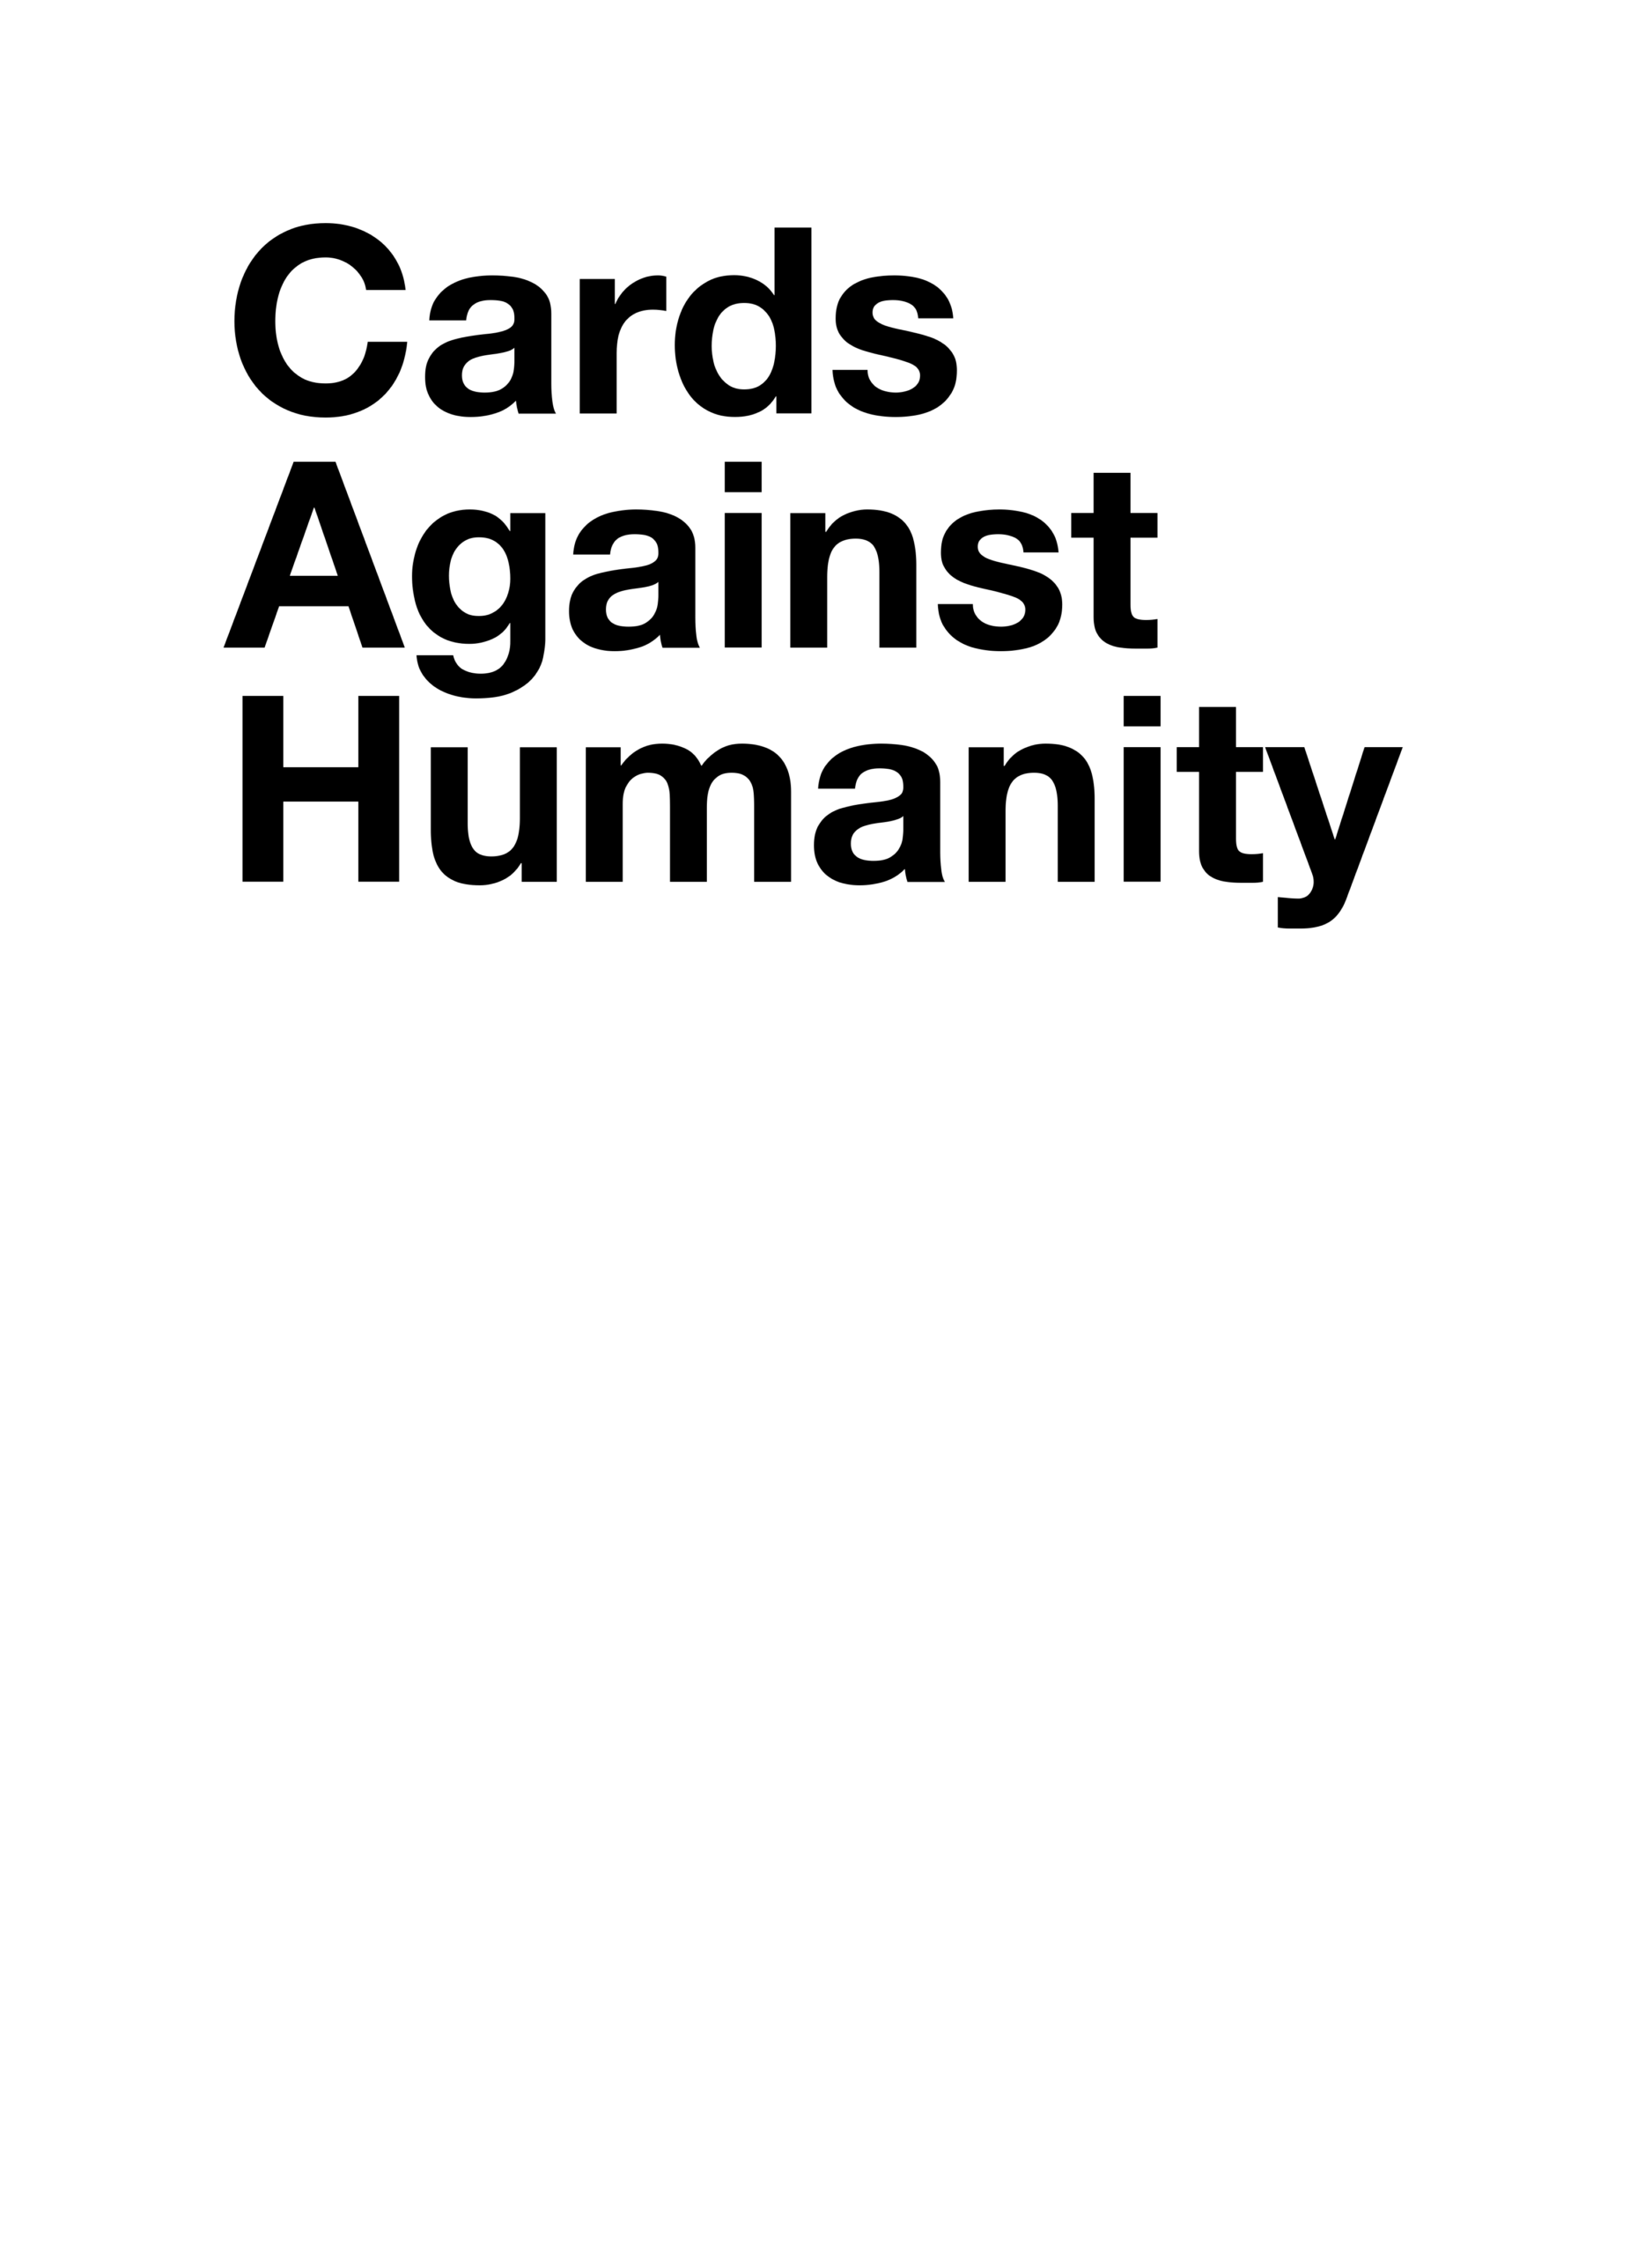 Cards Against Humanity - Card Generator Regarding Cards Against Humanity Template